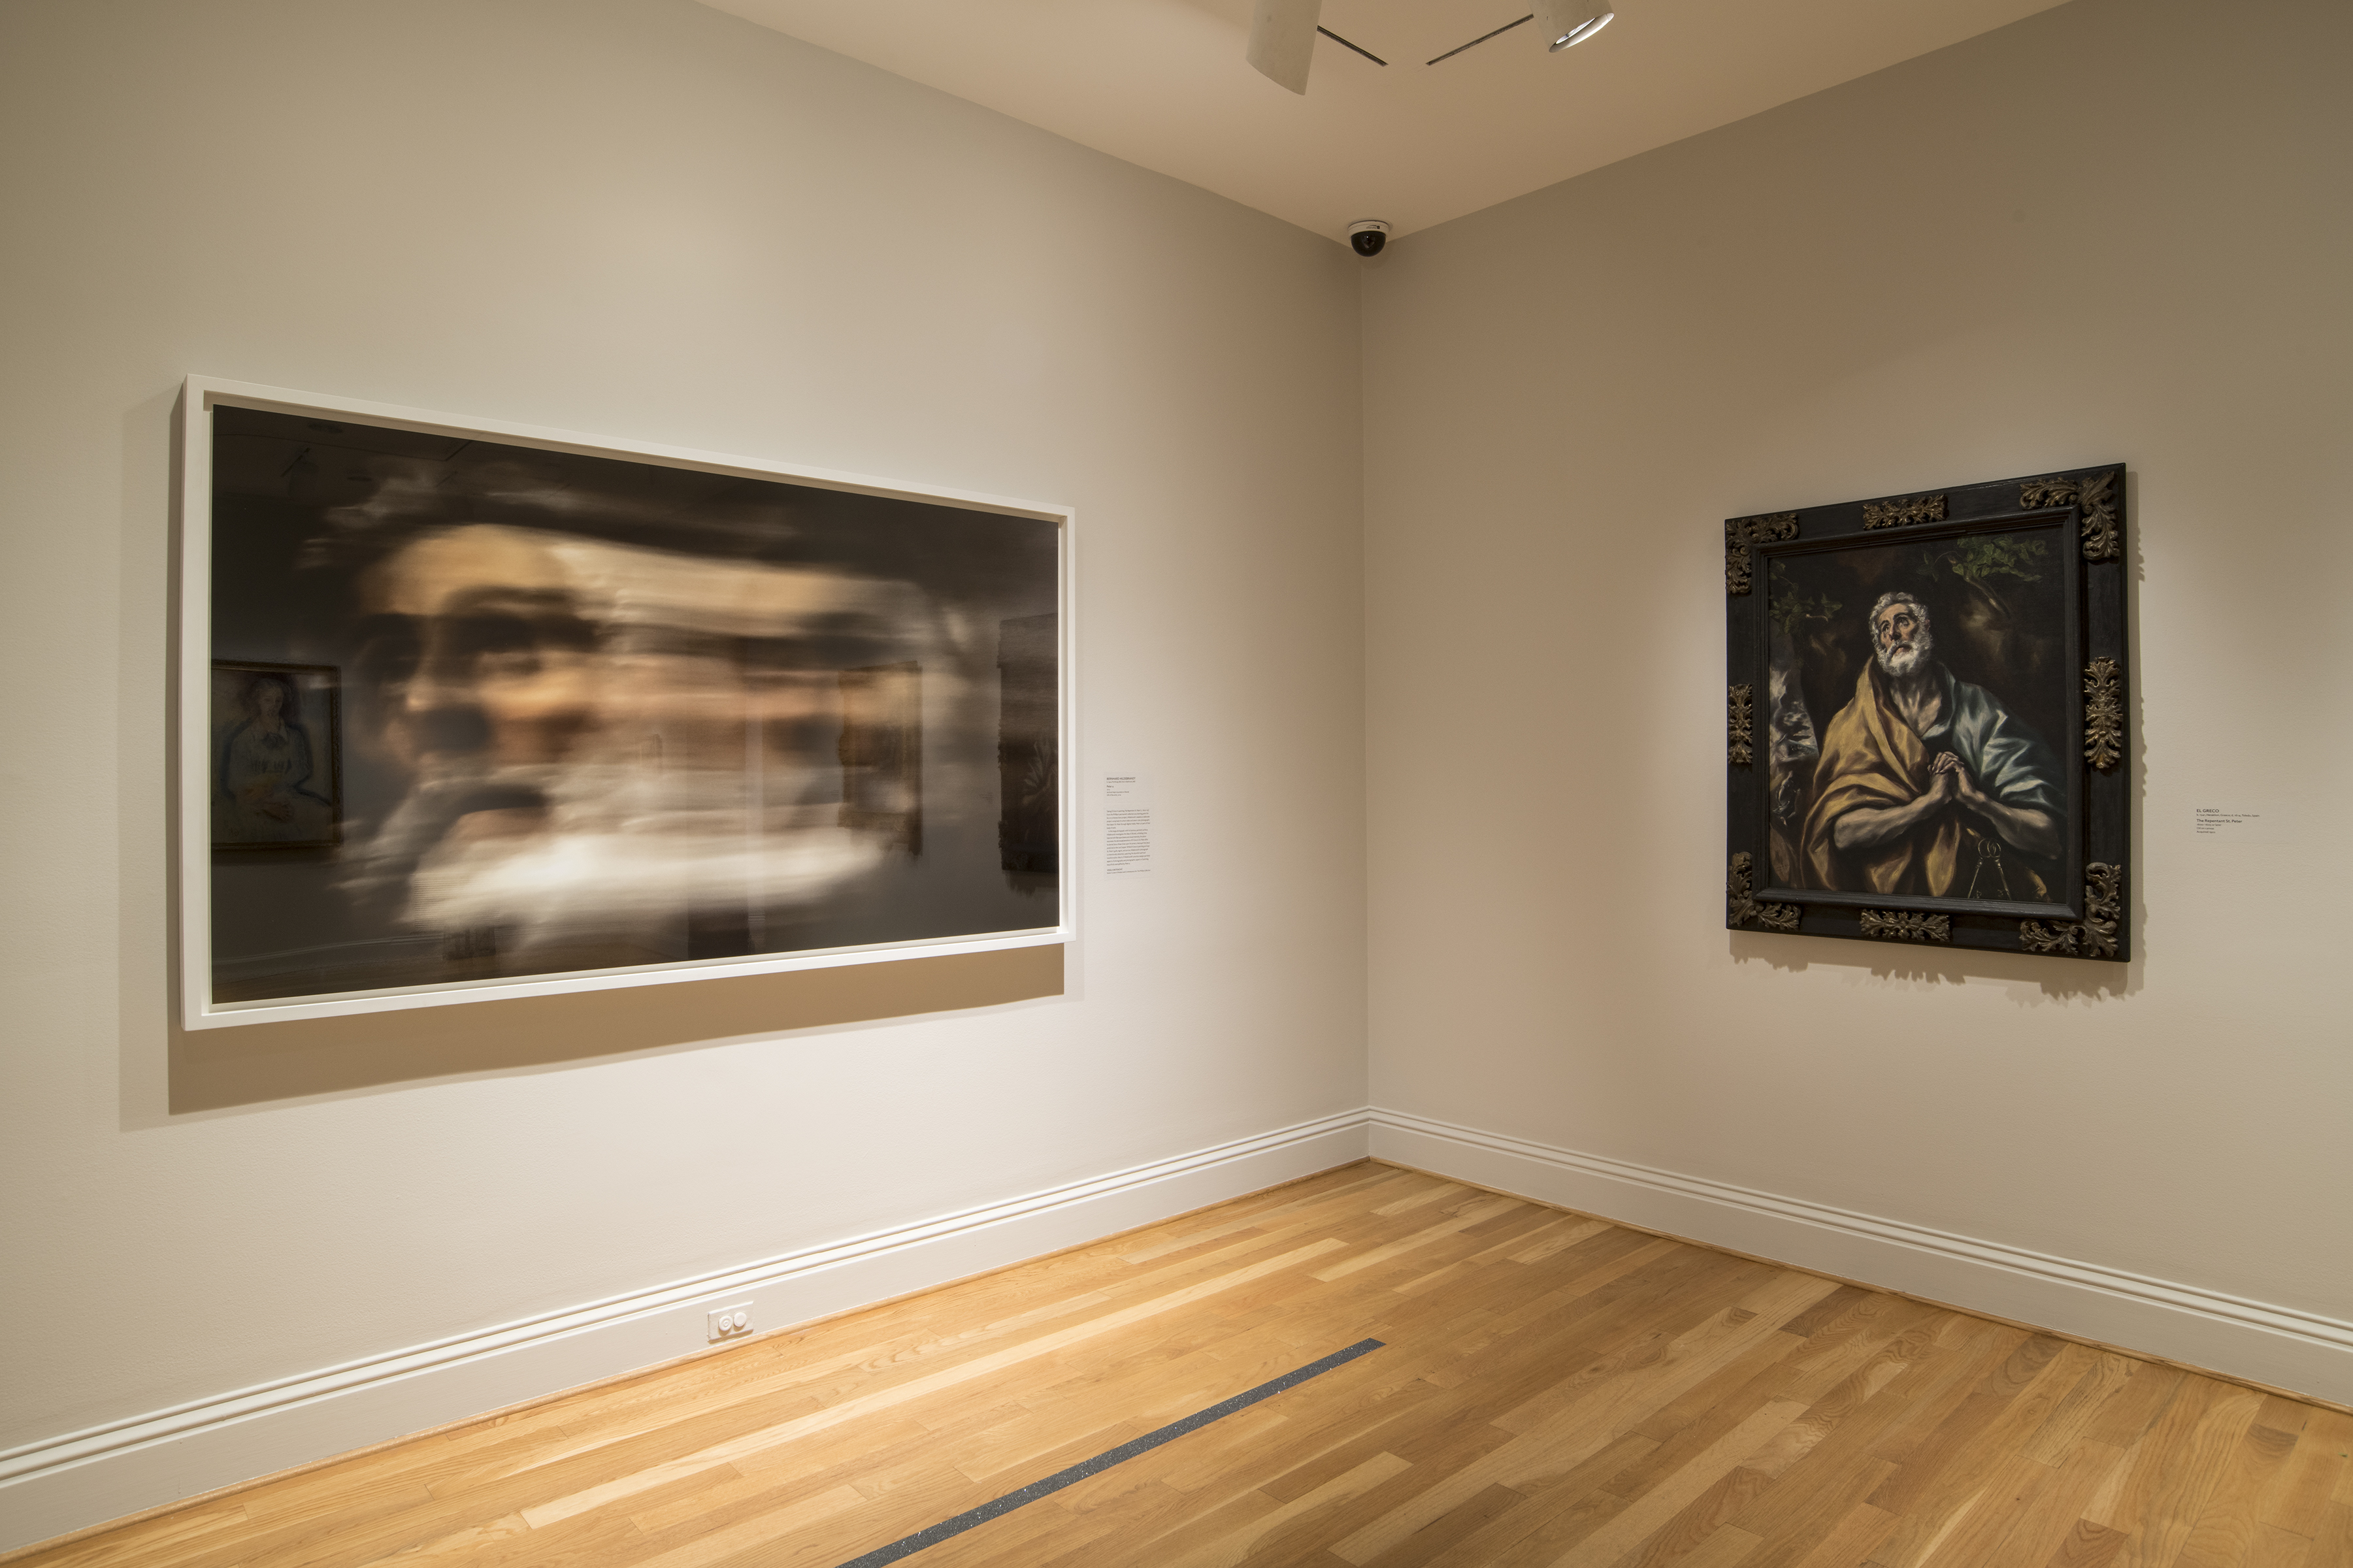 installation view of blurred photograph of man on left with similar painting of man on right